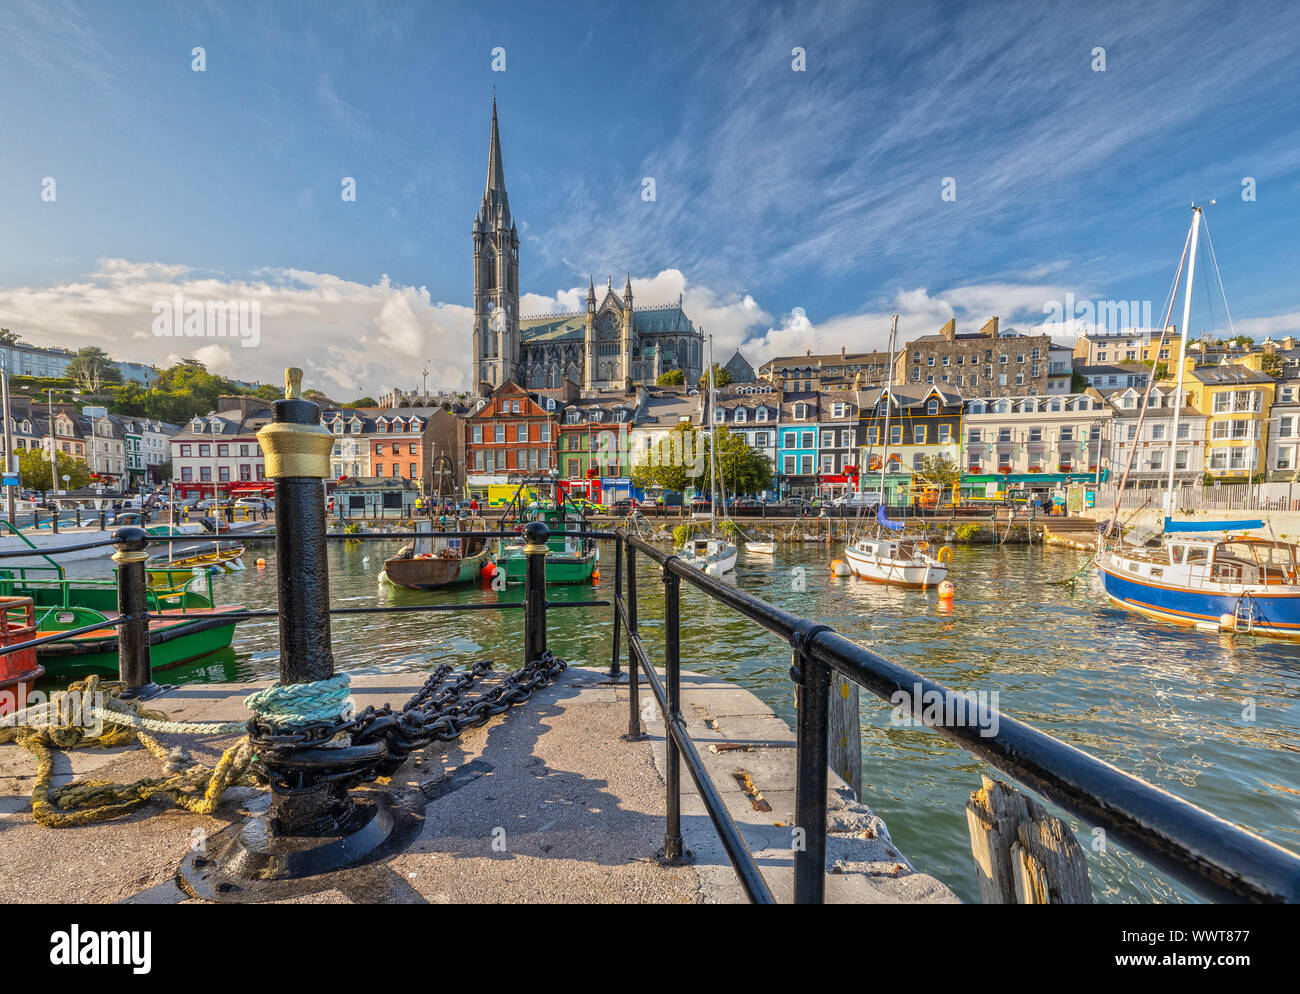 Impression of the St. Colman's Cathedral in Cobh near Cork, Ireland Stock Photo